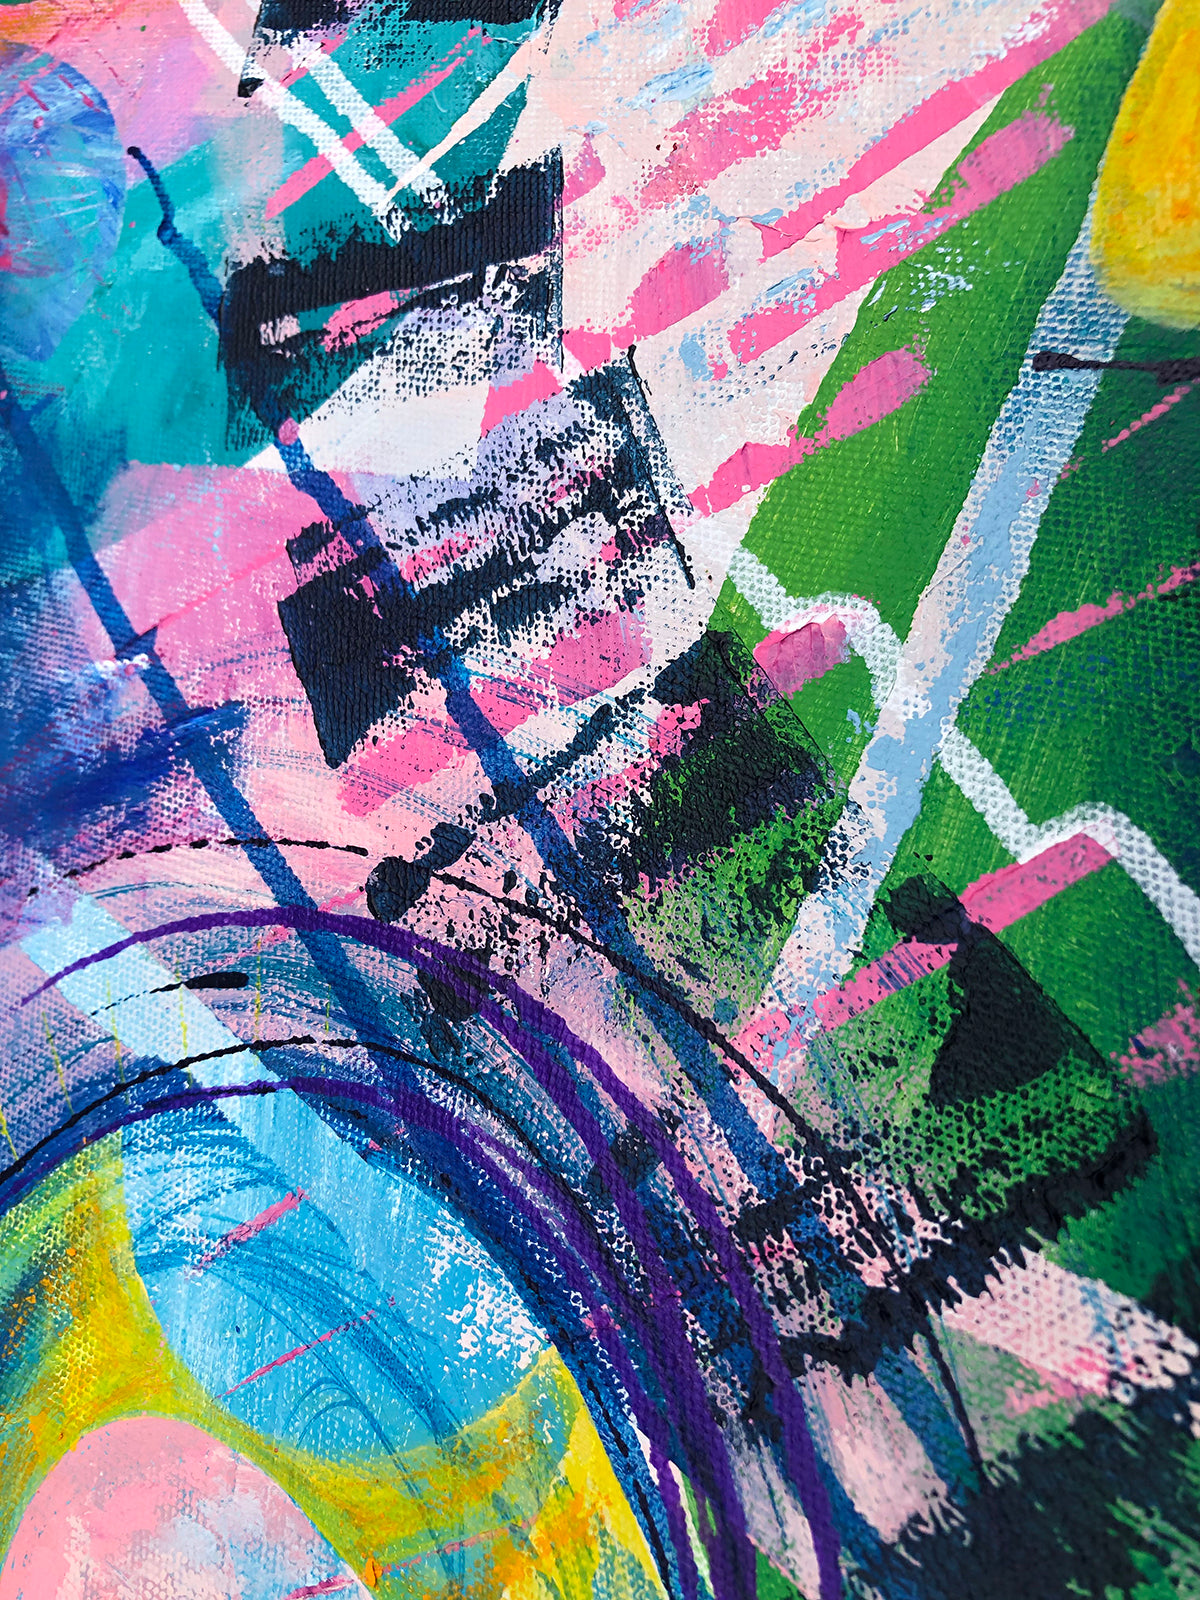 Close-up detail of colourful abstract painting called Awakening by artist Melanie Howells.